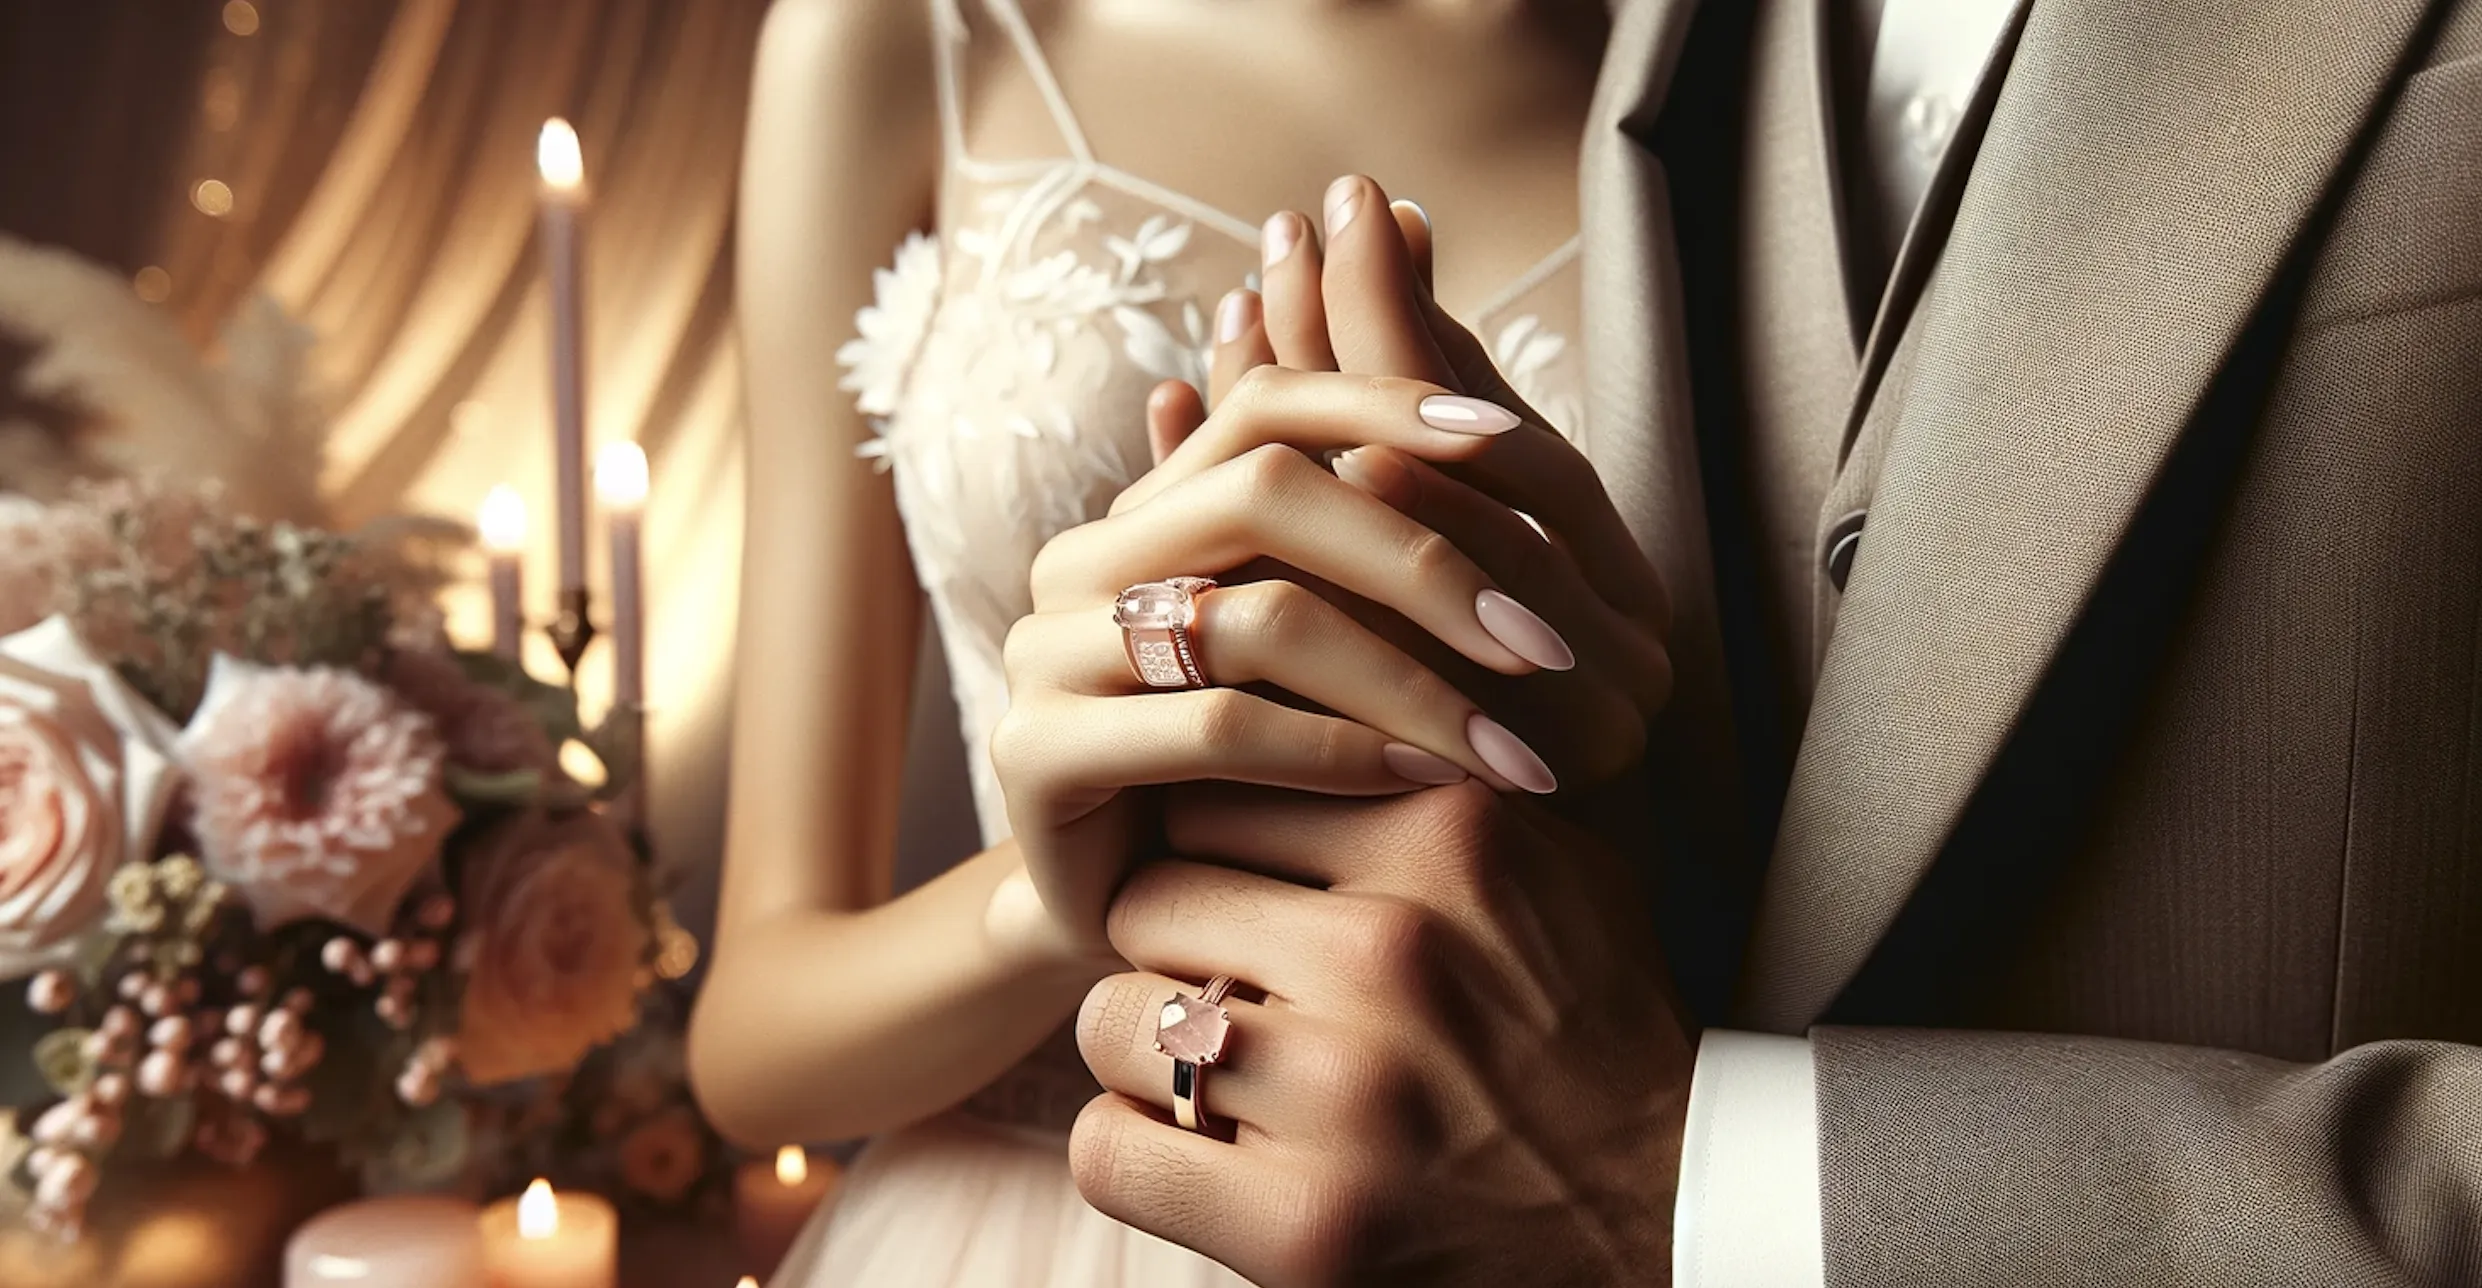 newlywed couple holding hands showing their rose quartz weddings rings